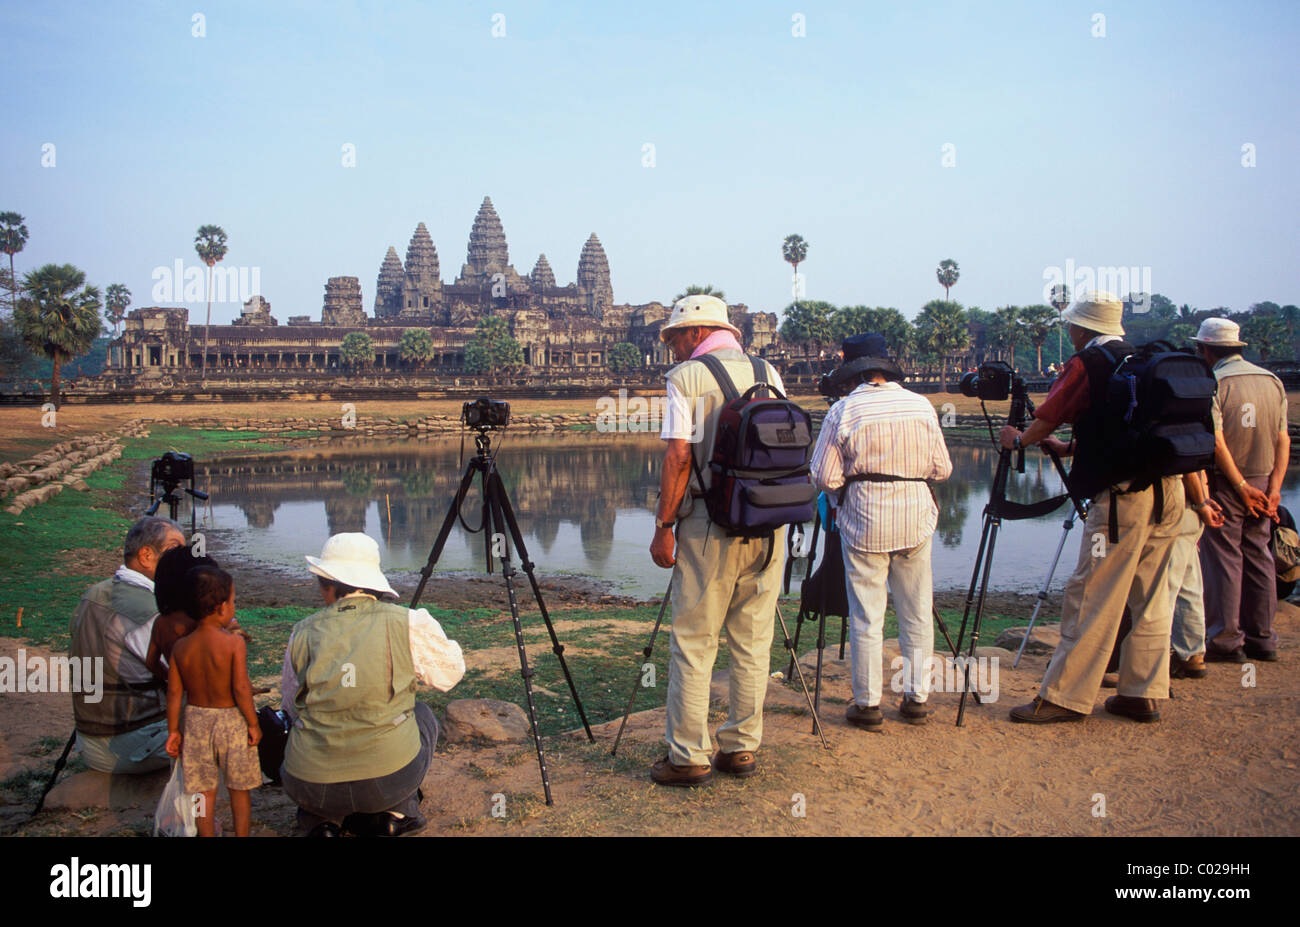 Photographers taking pictures of Angkor Wat temple, Angkor temples, Siem Reap, Cambodia, Indochina, Southeast Asia Stock Photo